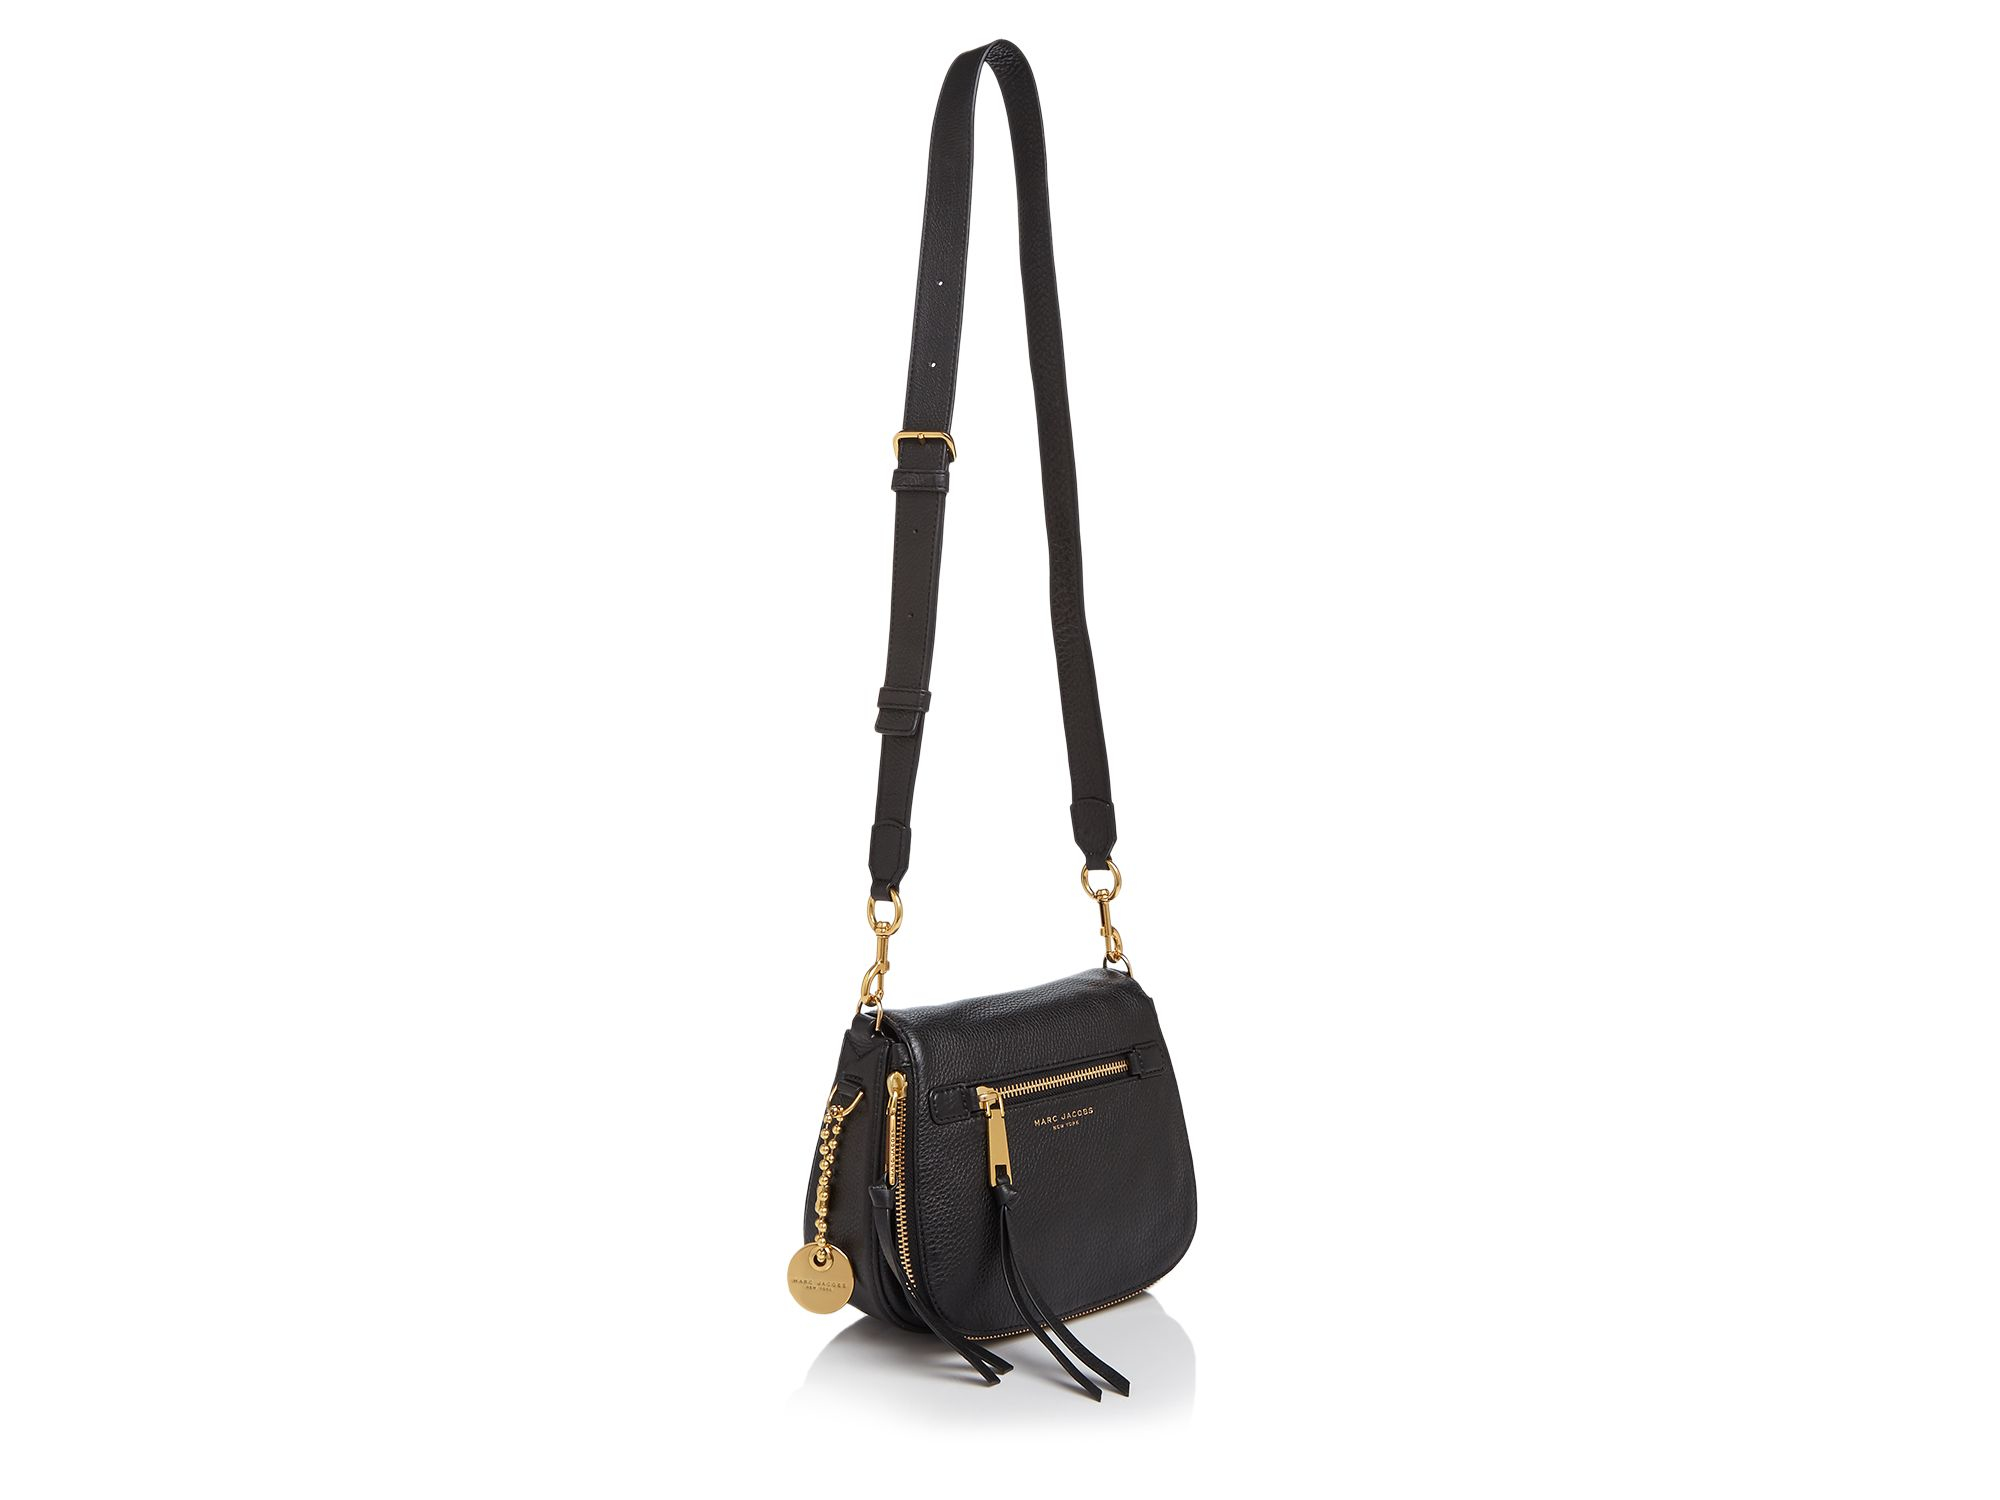 Marc jacobs Recruit Small Nomad Leather Saddle Bag in Black - Save 11% ...